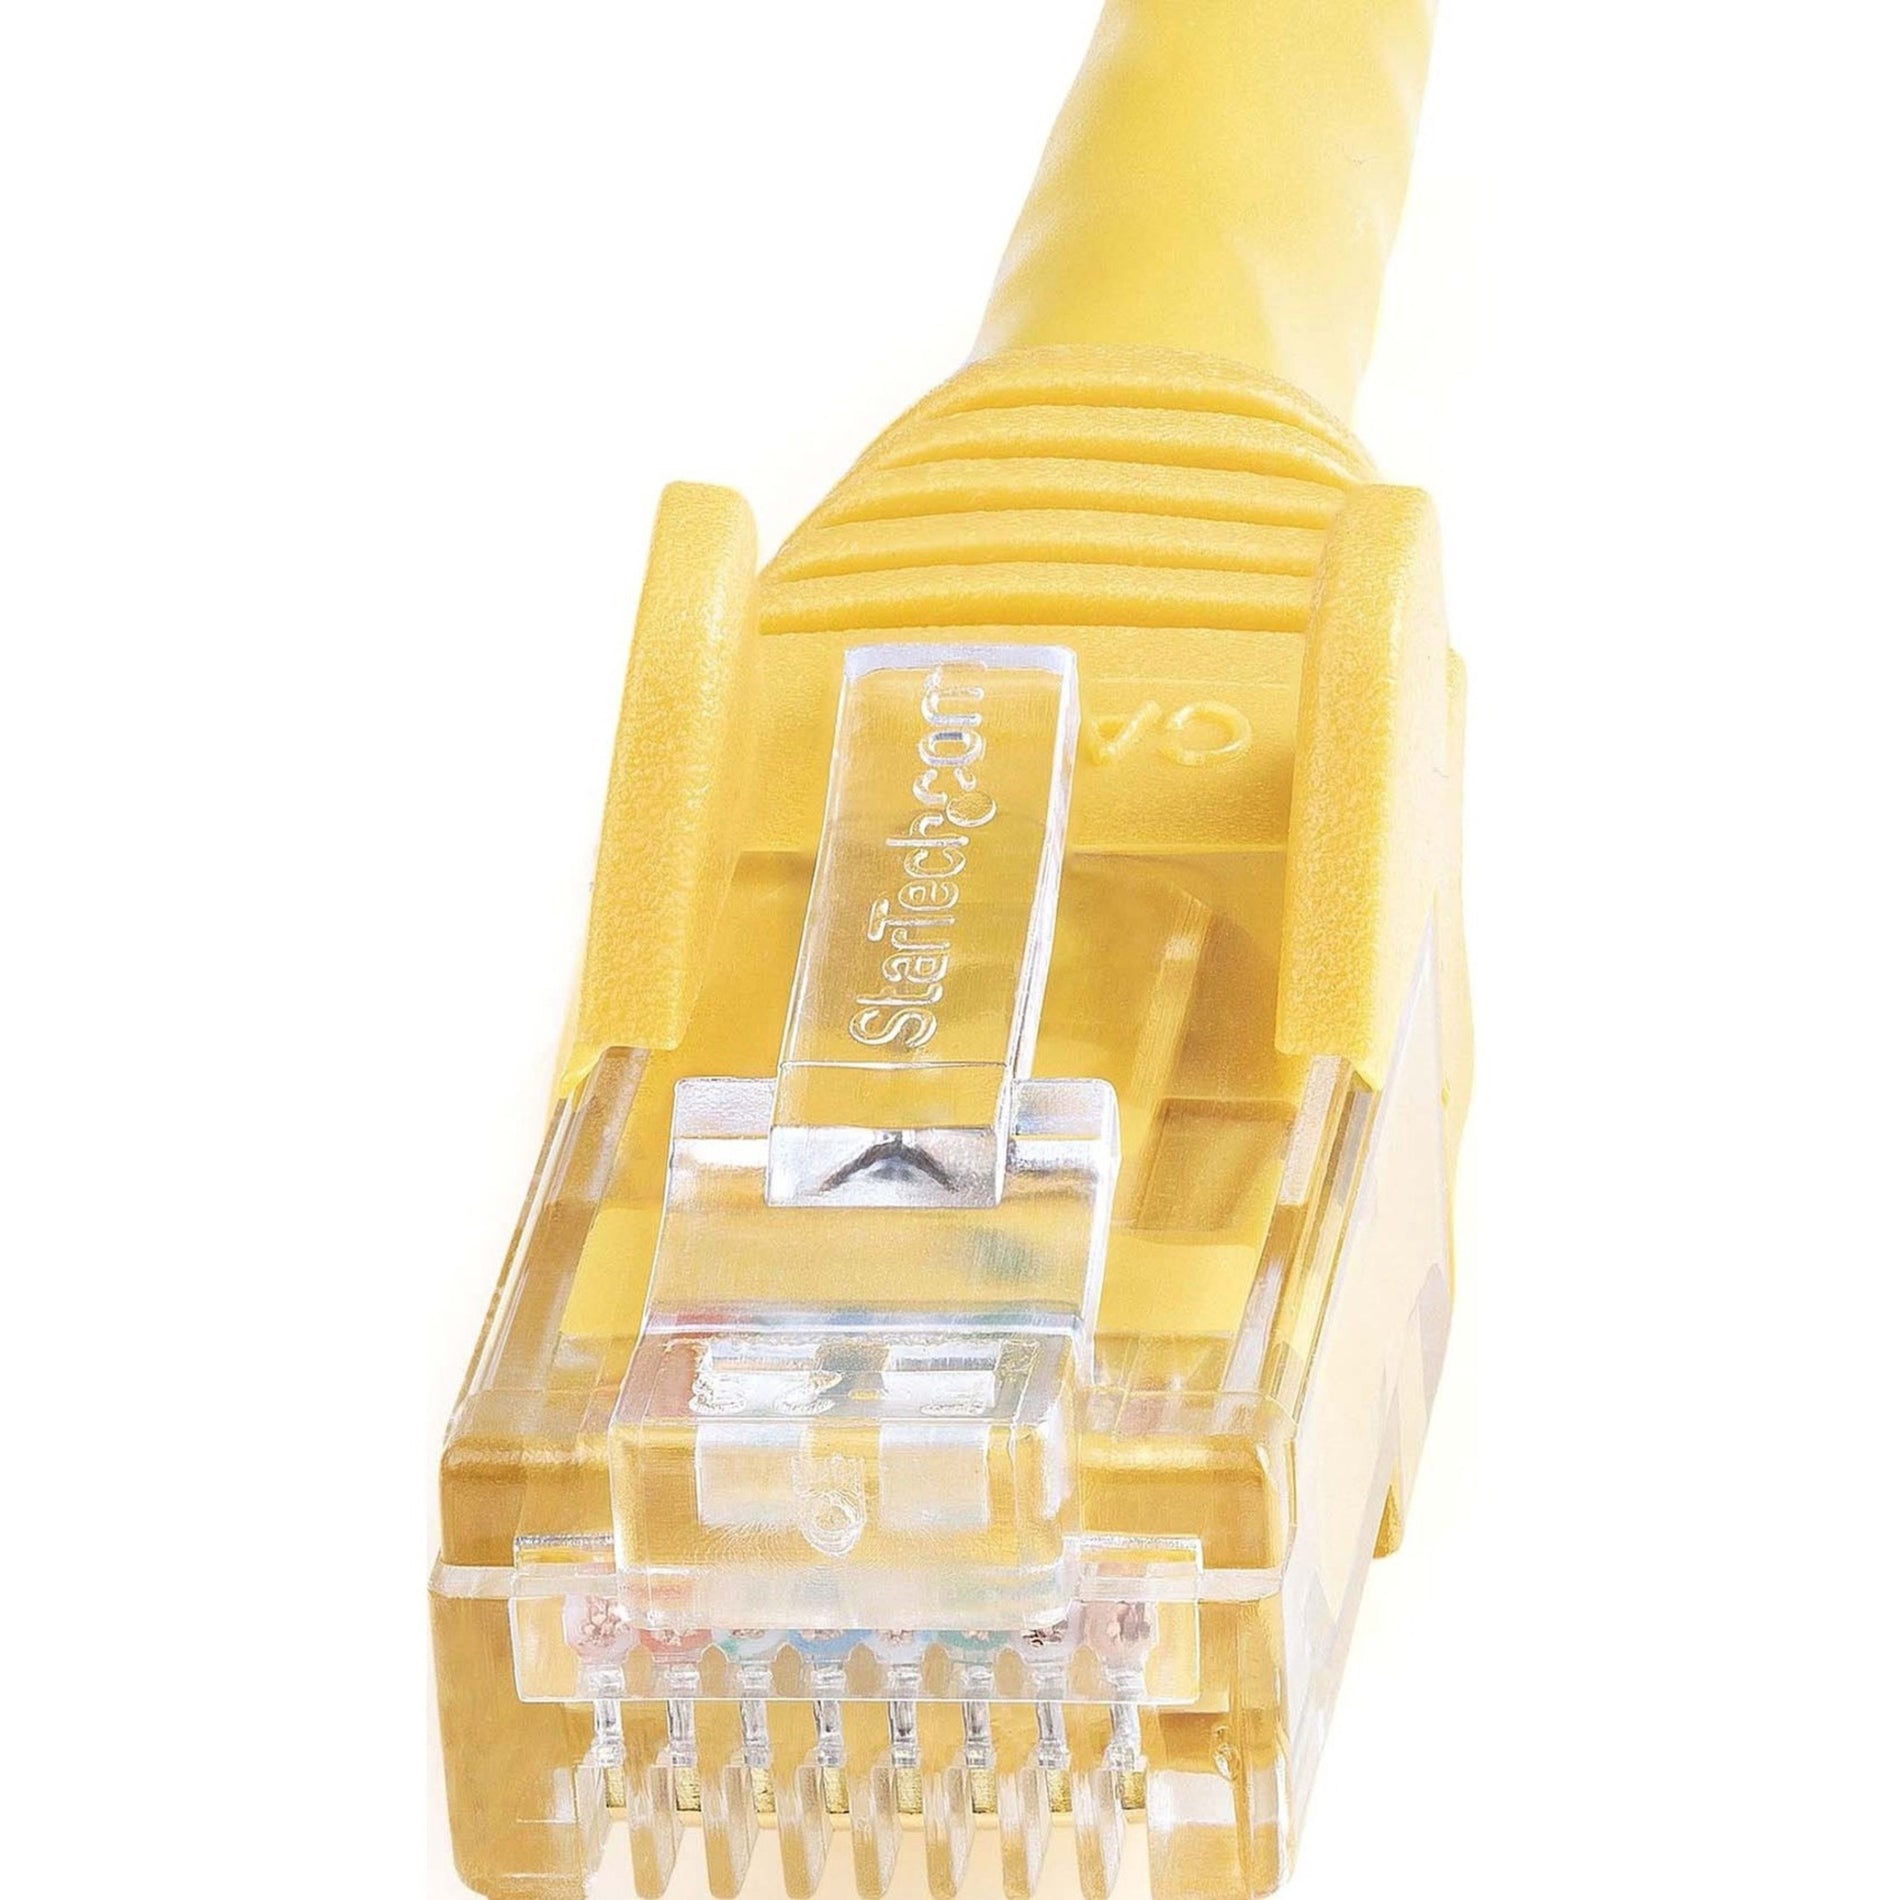 StarTech.com N6PATCH125YL Cat6 Patch Cable, 125ft Yellow Ethernet Cable, Snagless RJ45 Connectors